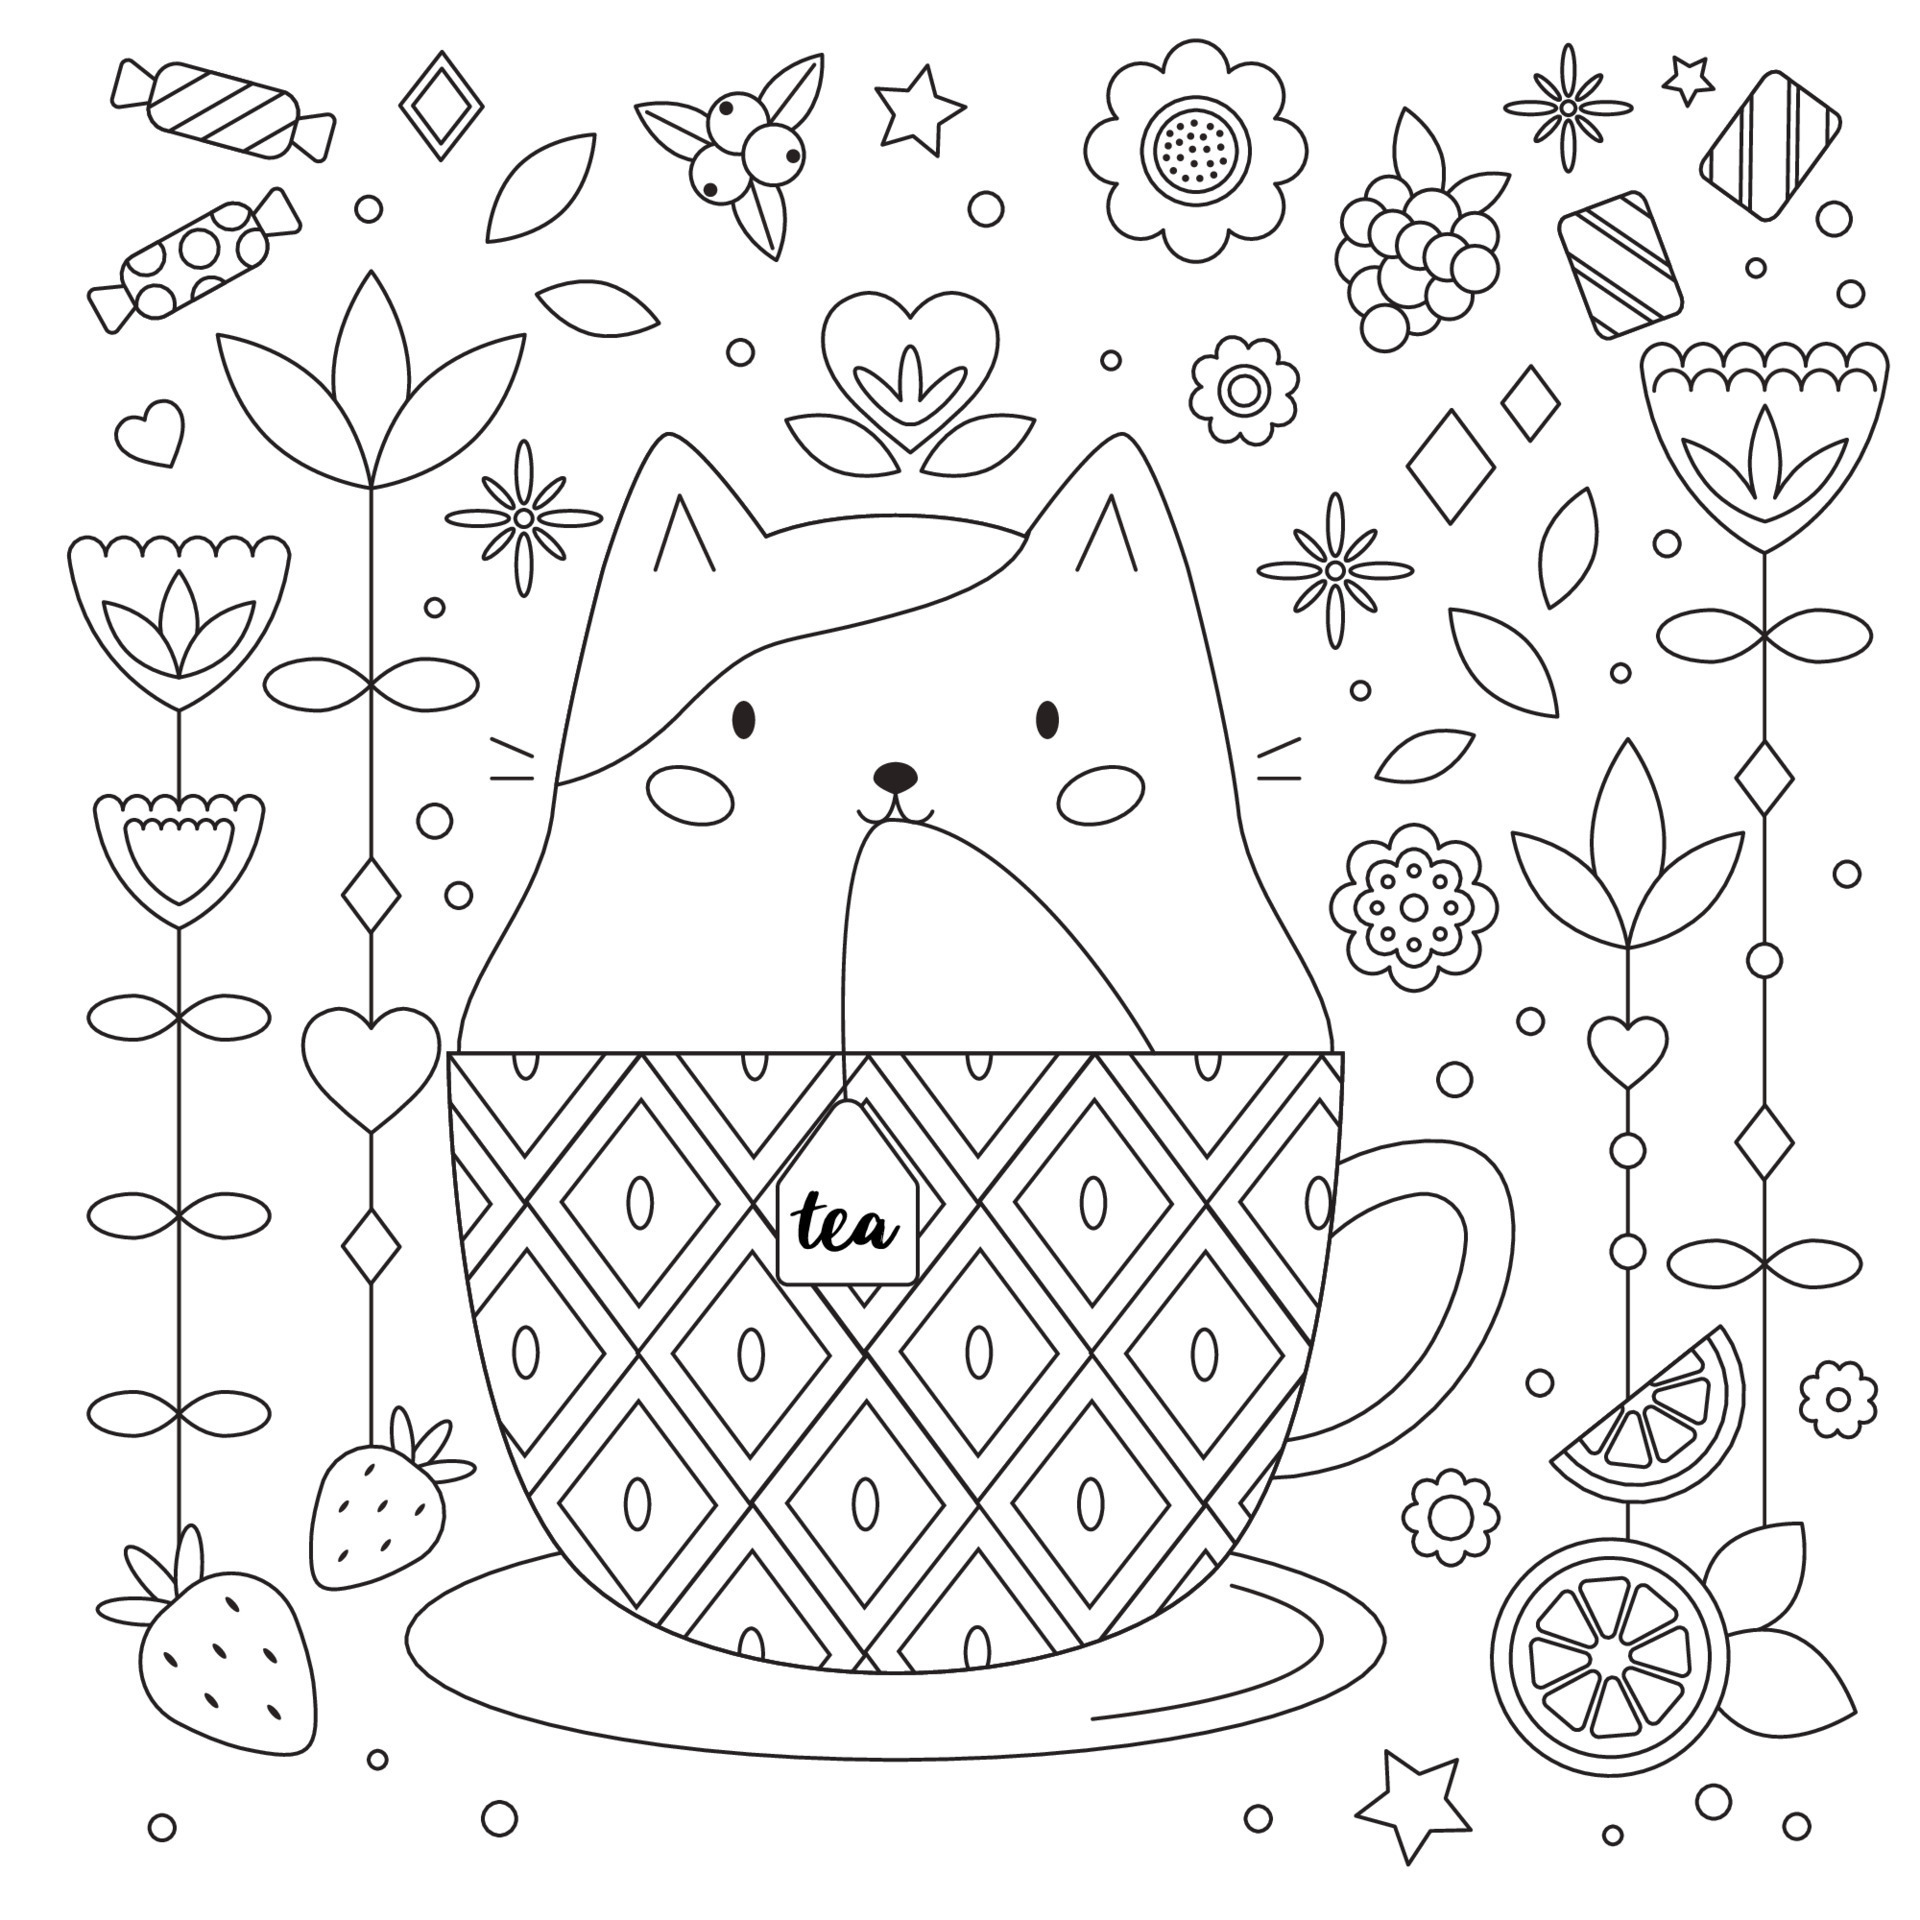 Coloring page loving cat in a cup